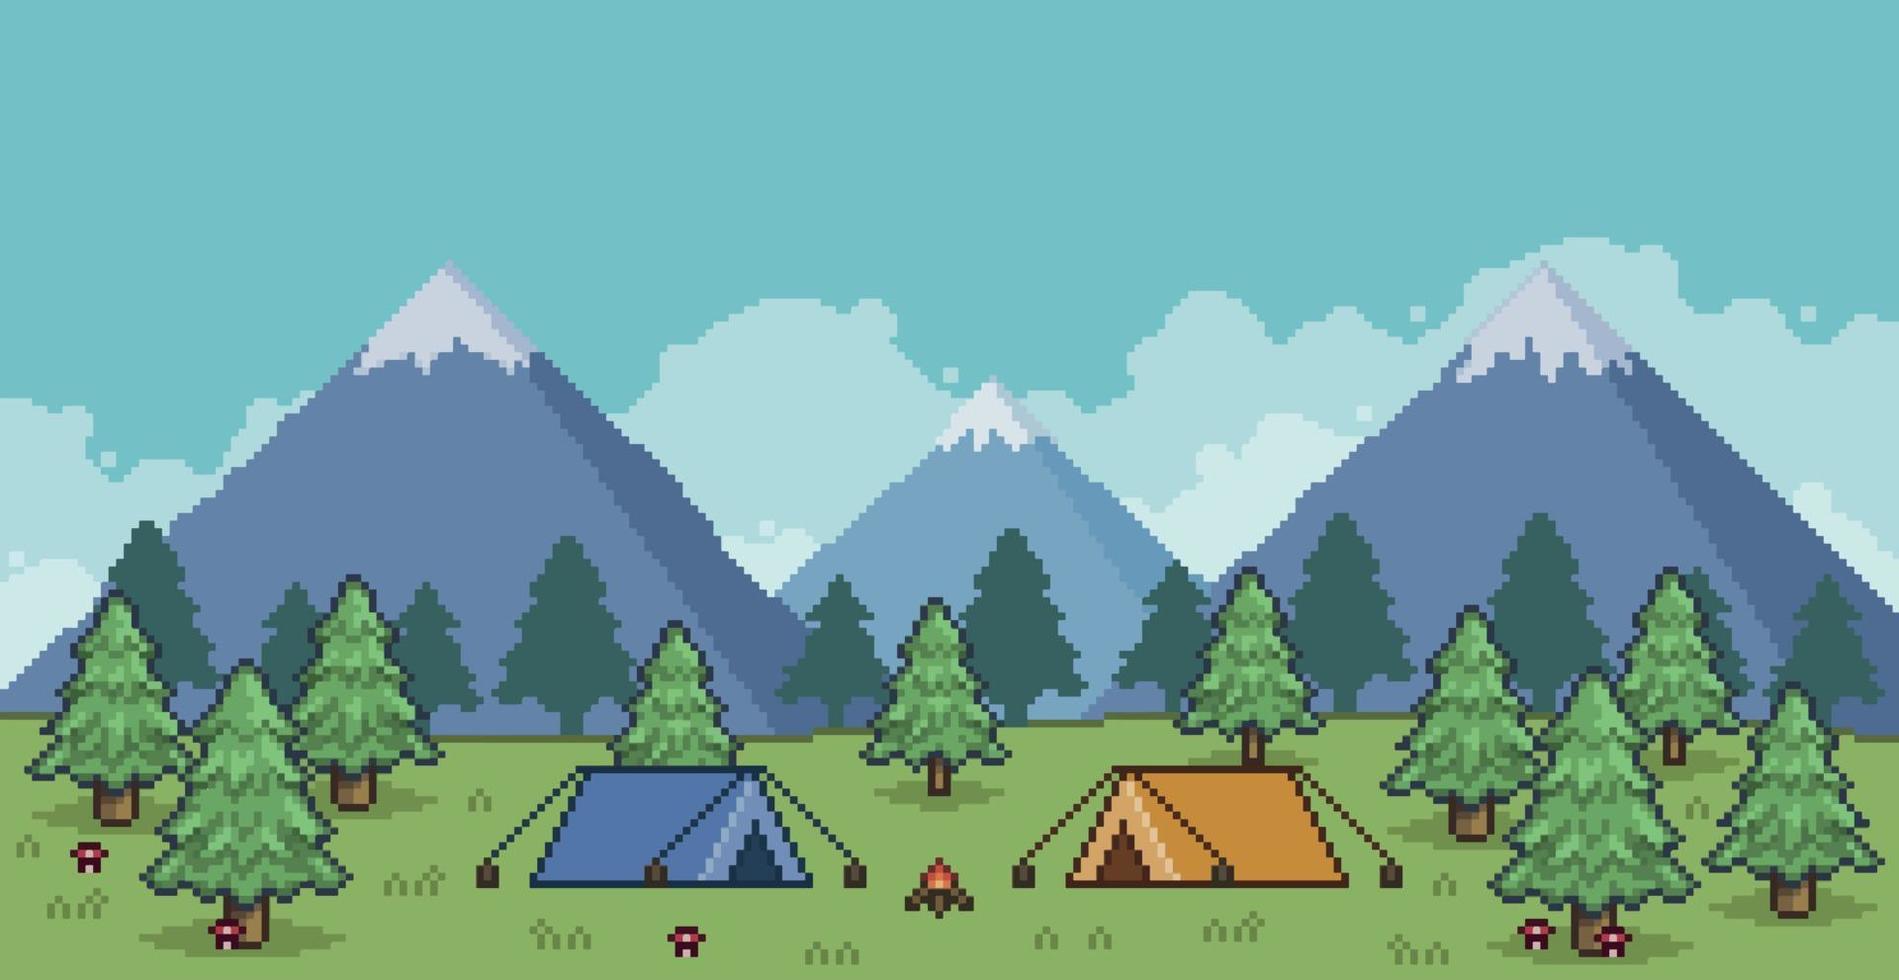 Pixel art camping landscape with tent, campfire, pine trees and mountains 8bit background vector